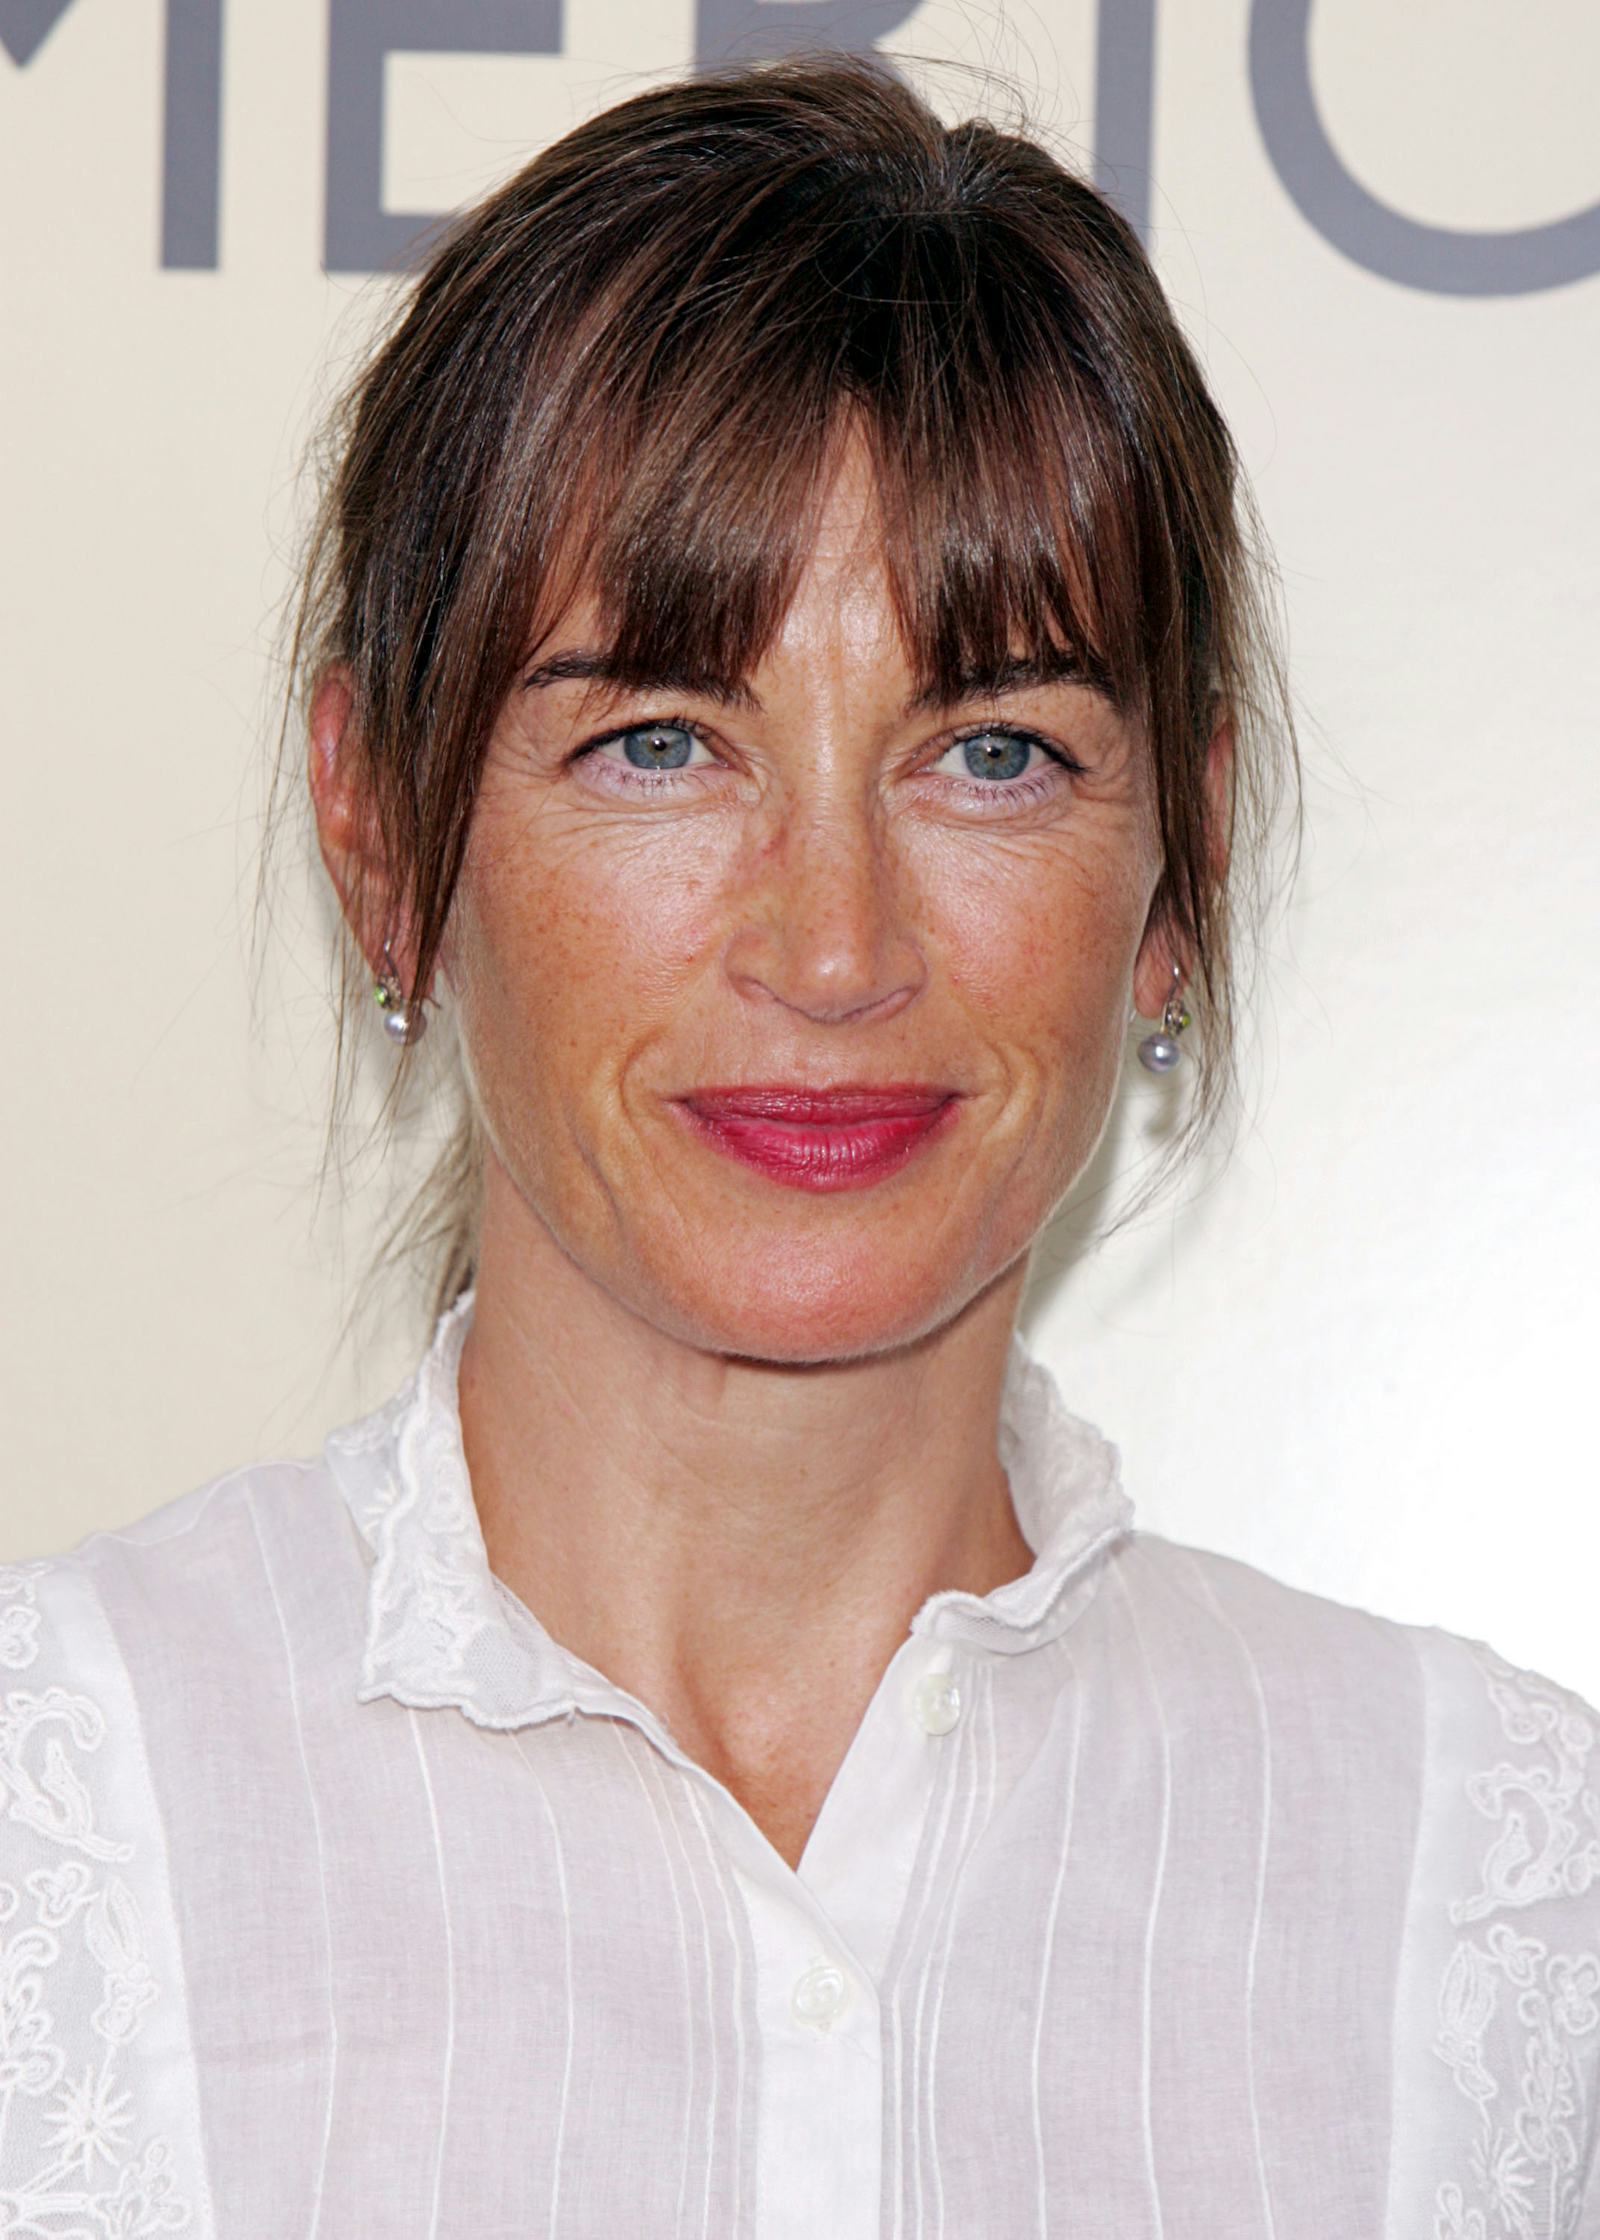 Who Is Tina McGee on 'The Flash'? Amanda Pays Has Played This Character ...